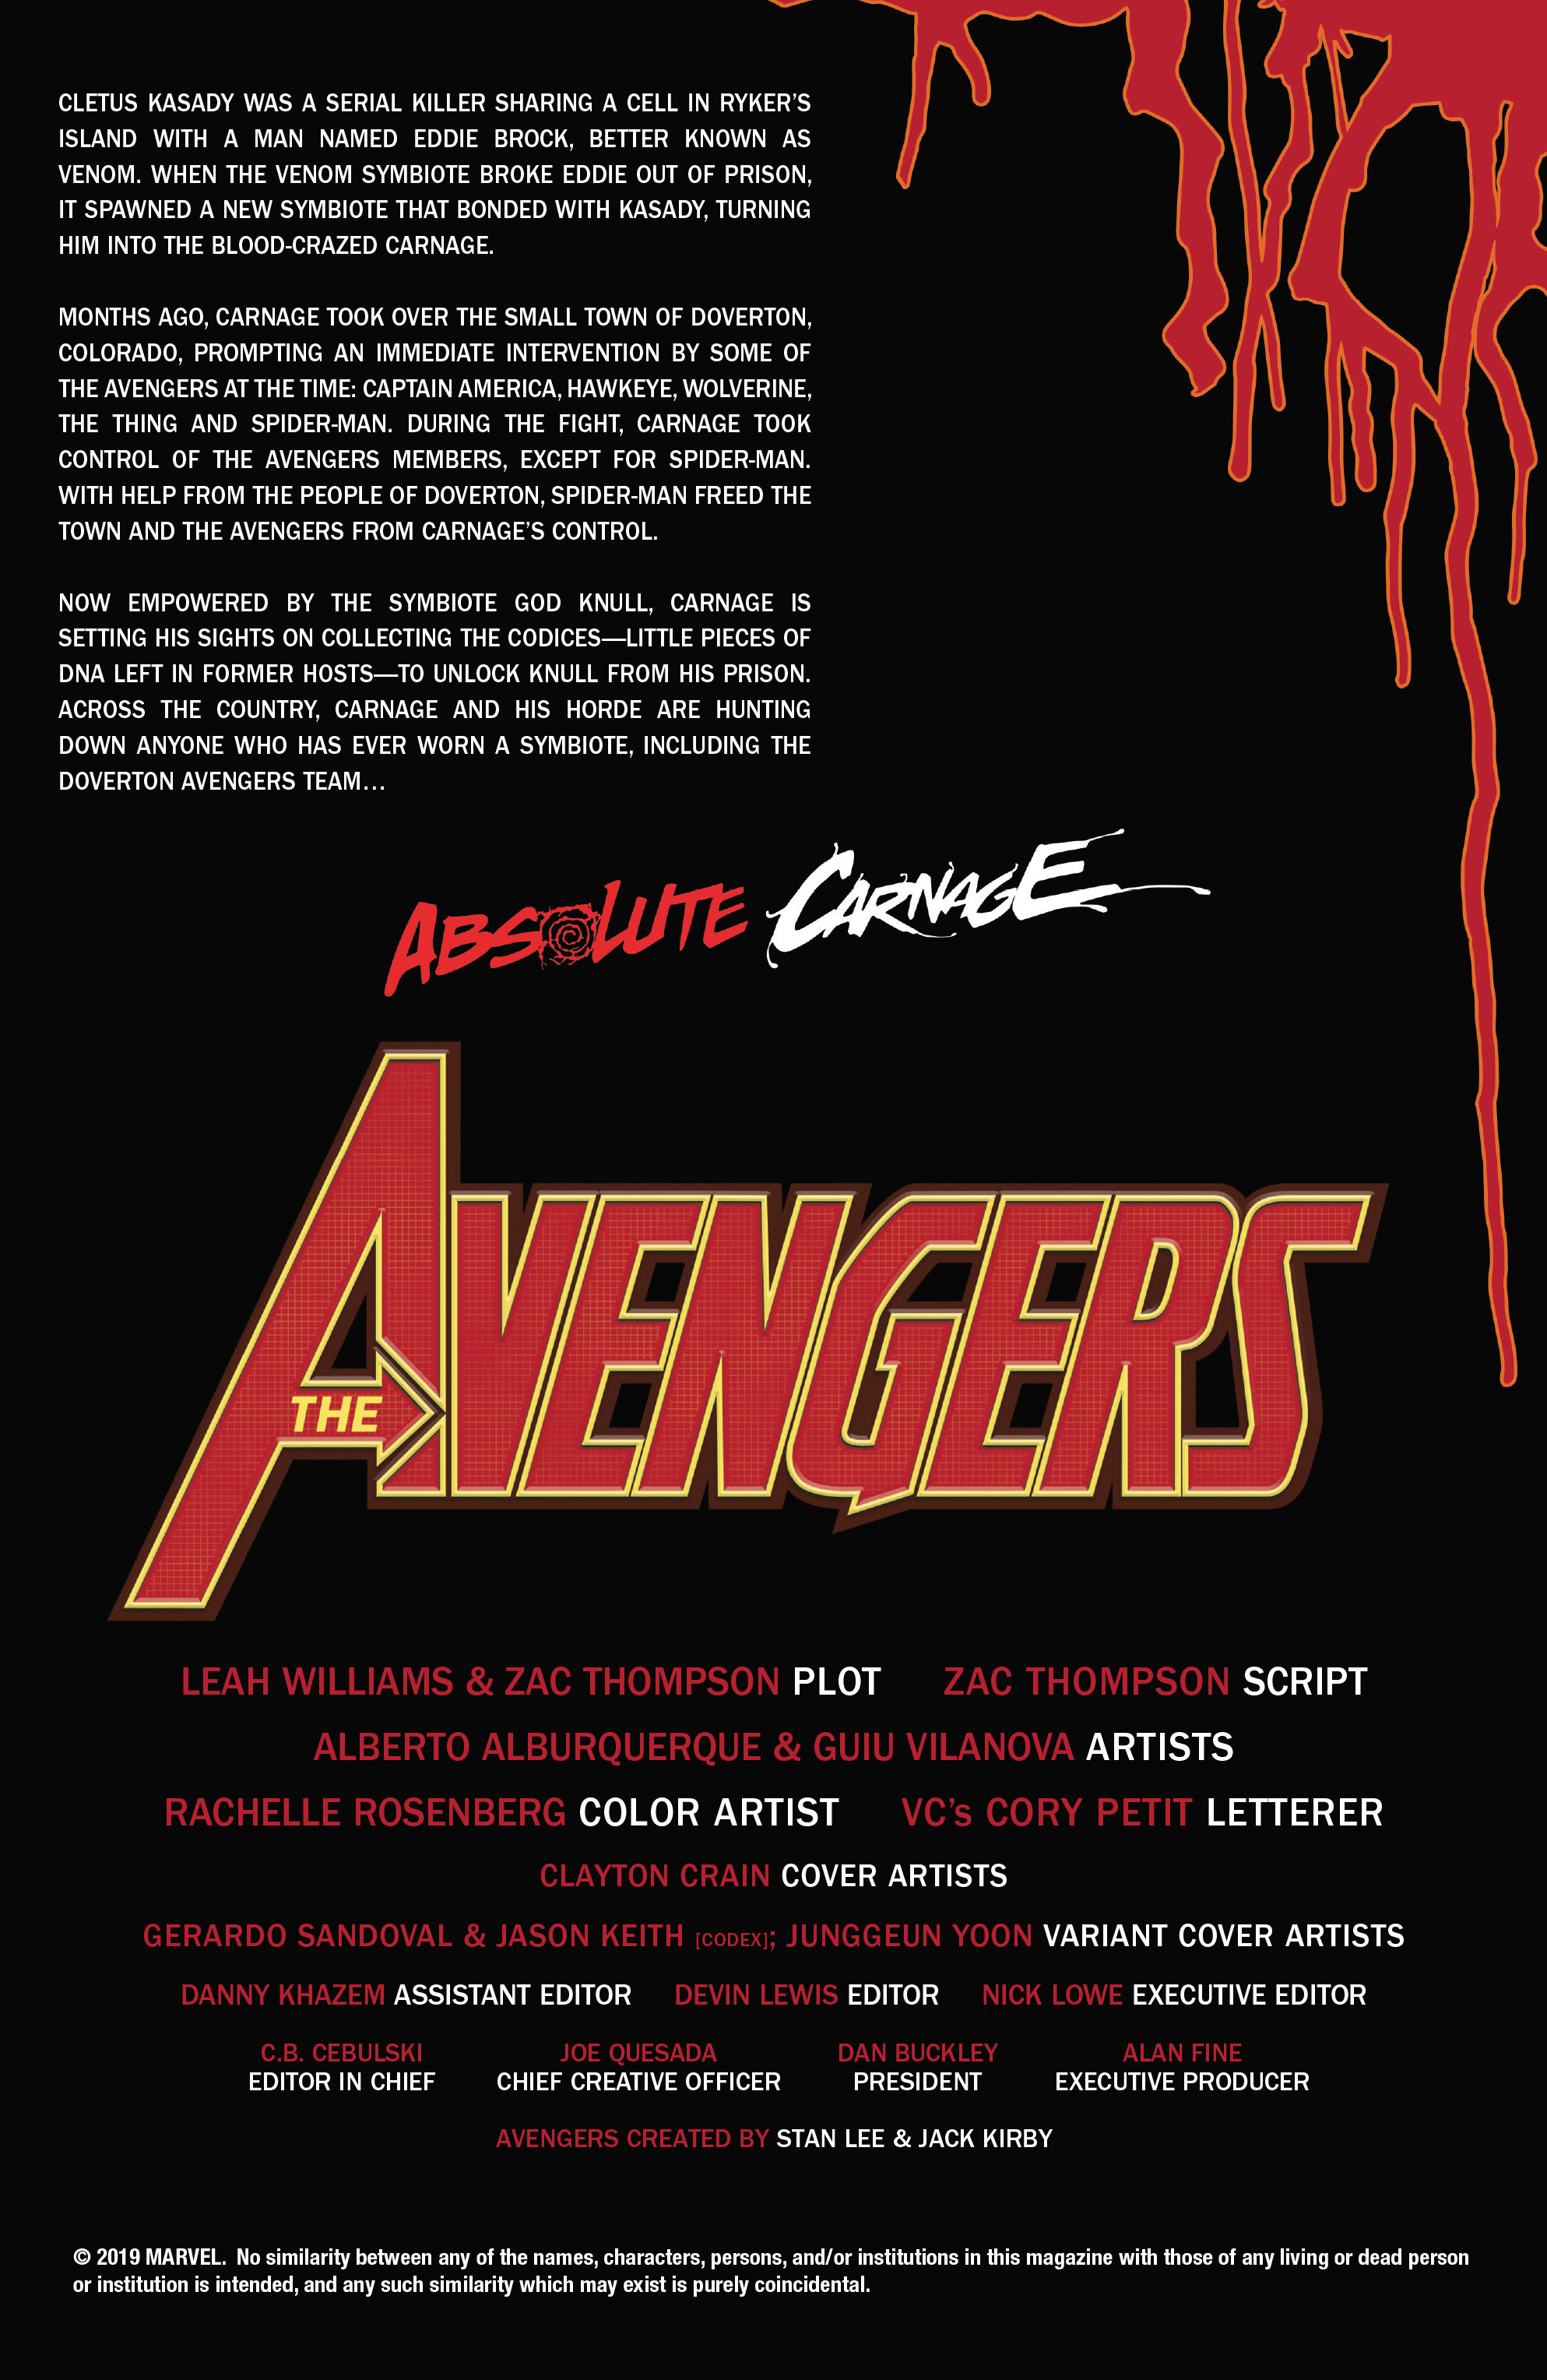 Read online Absolute Carnage: Avengers comic -  Issue # Full - 2